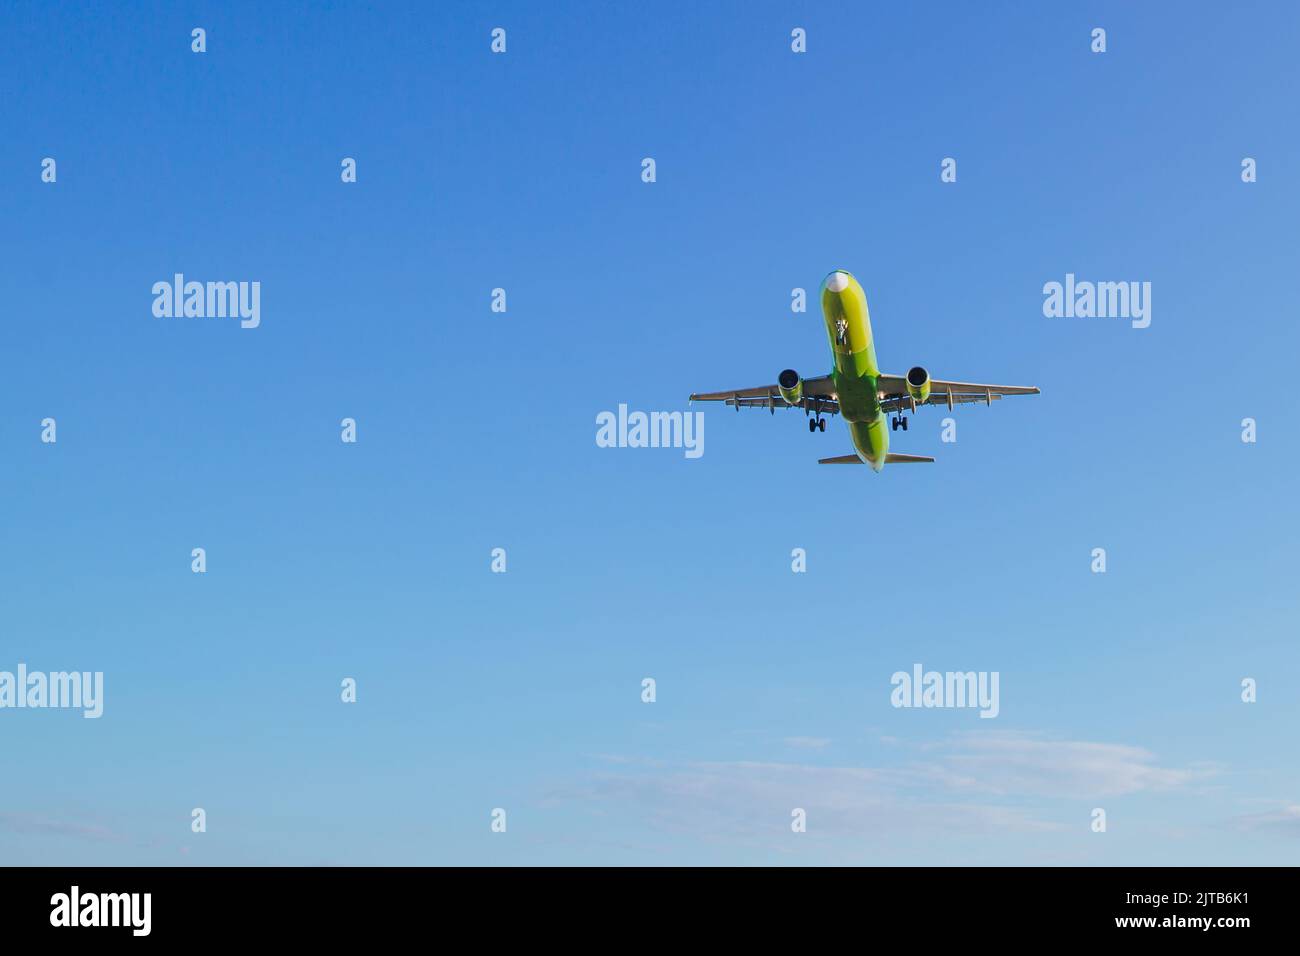 Passenger plane of yellow-green color flies in the blue sky, air transportation concept, population evacuation. Stock Photo